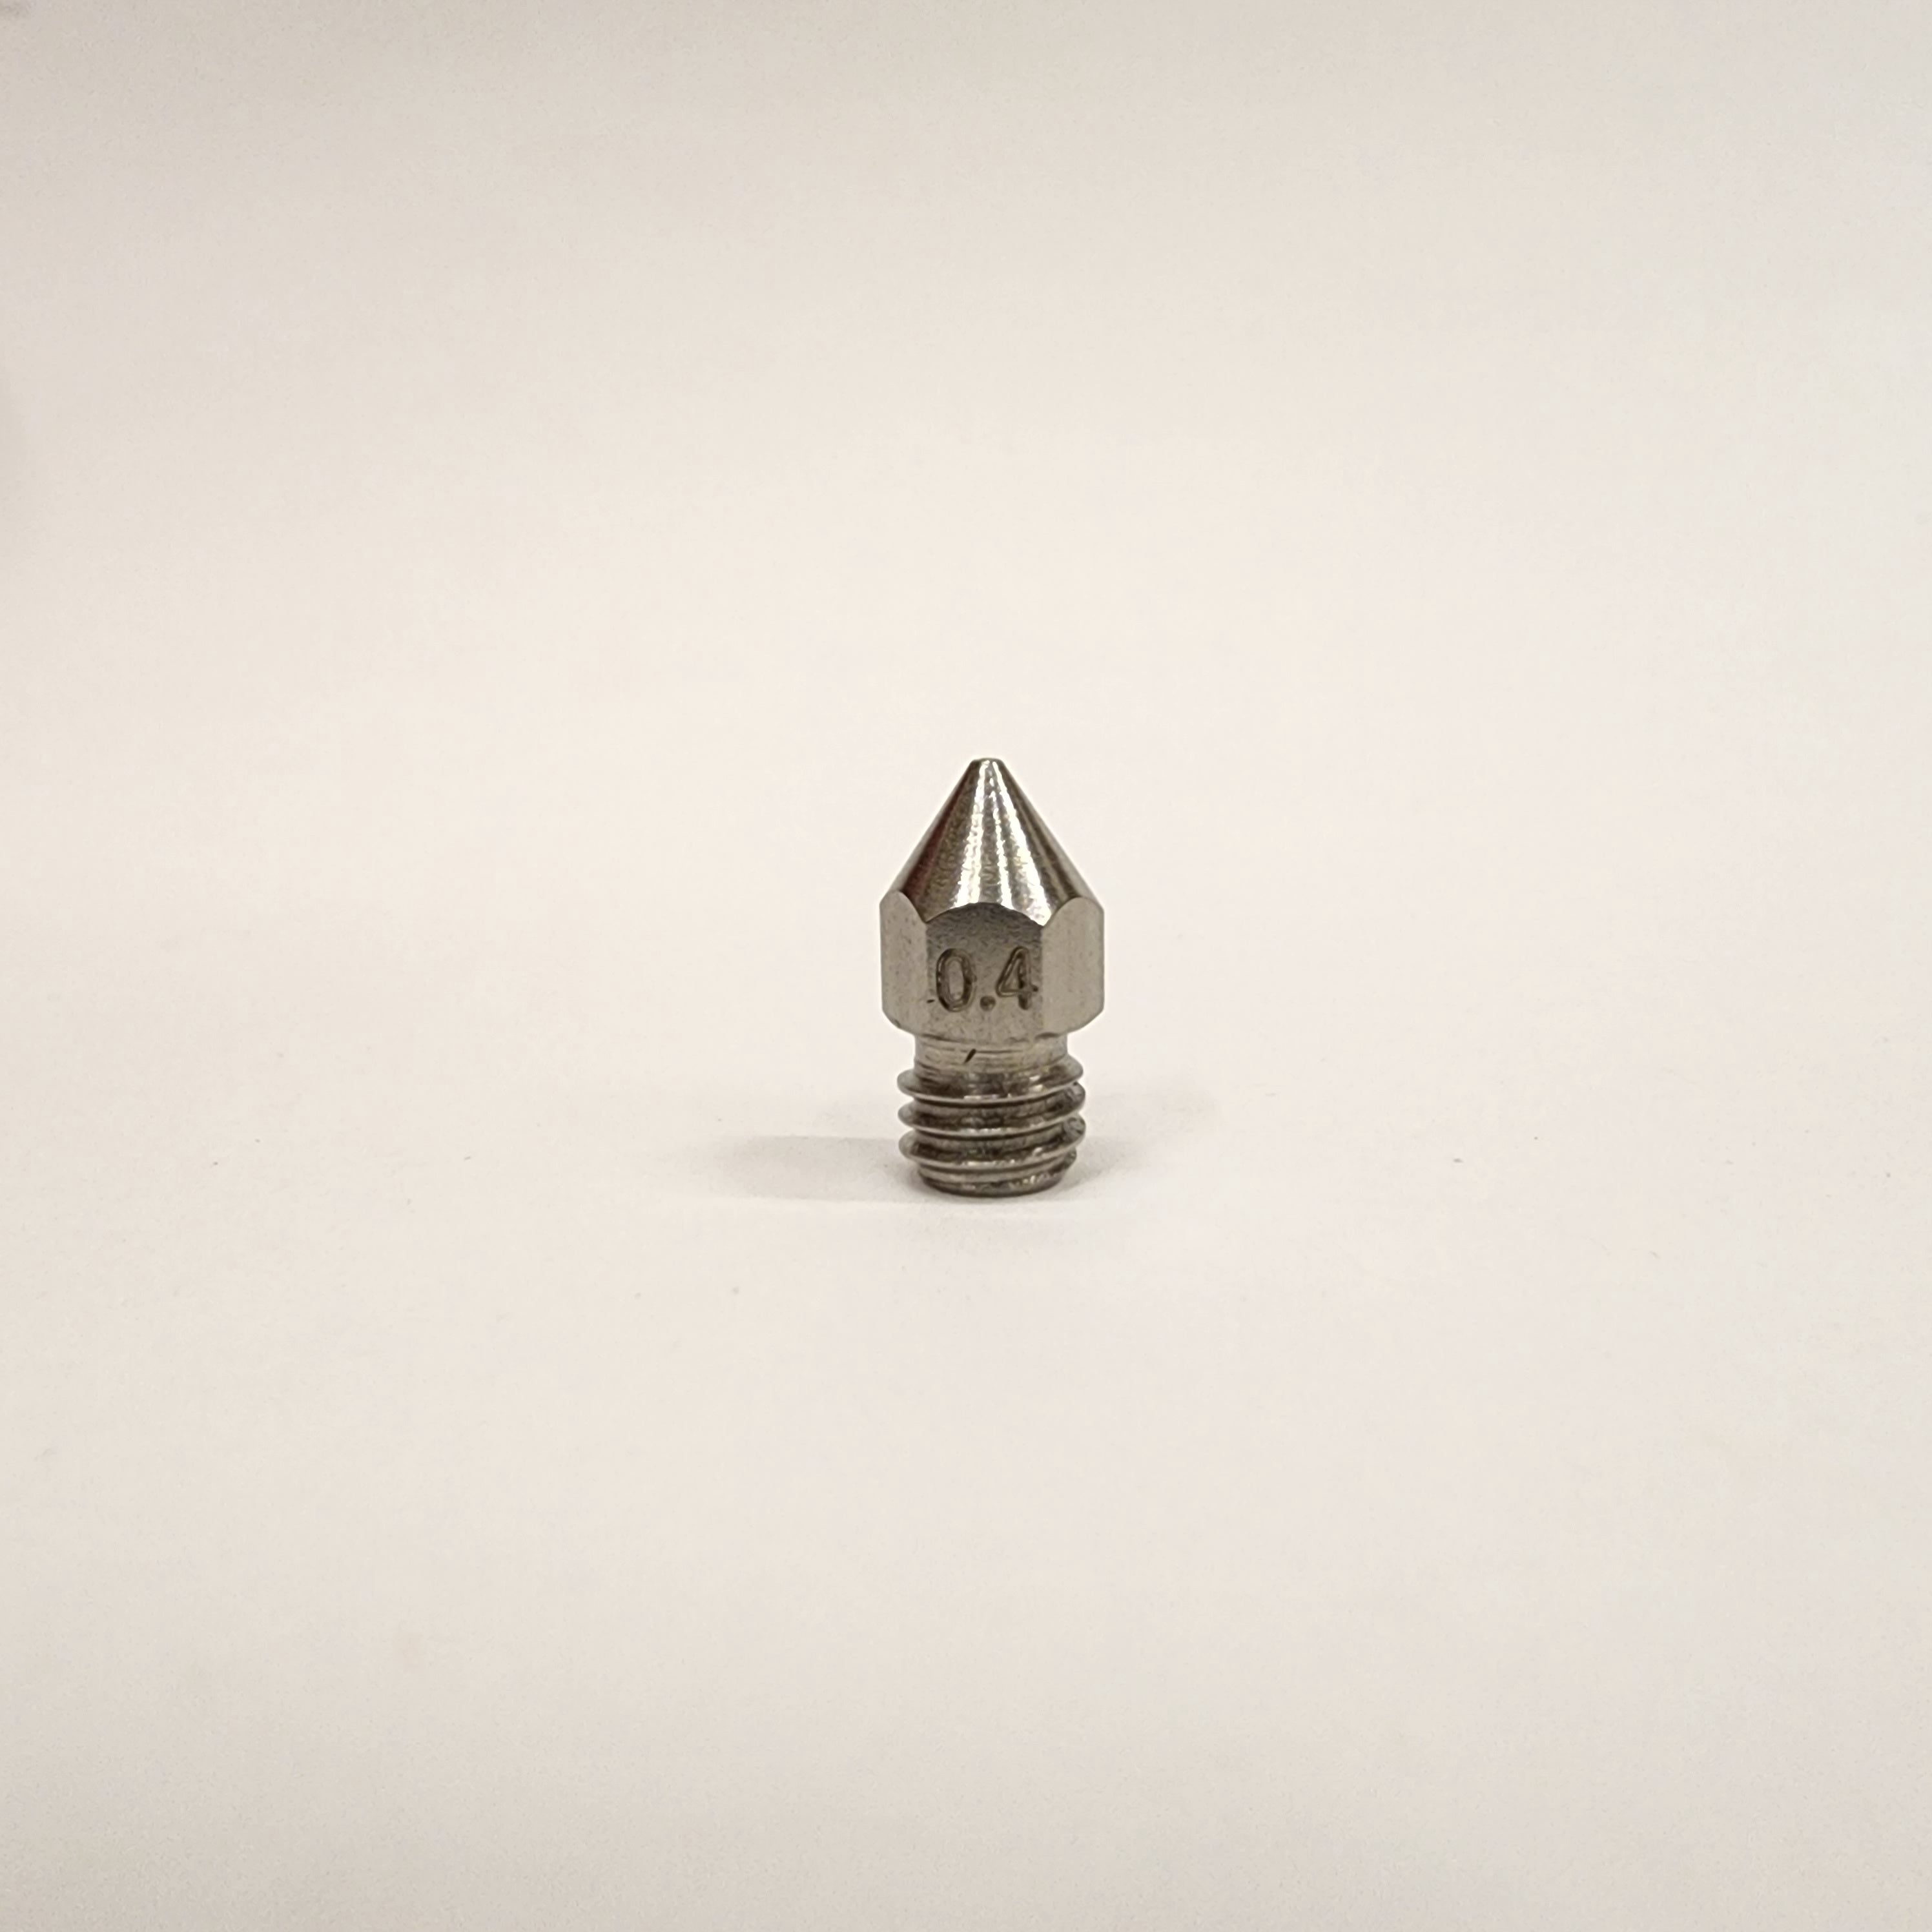 MK8 Stainless Steel Nozzle 1.75mm 0.4mm